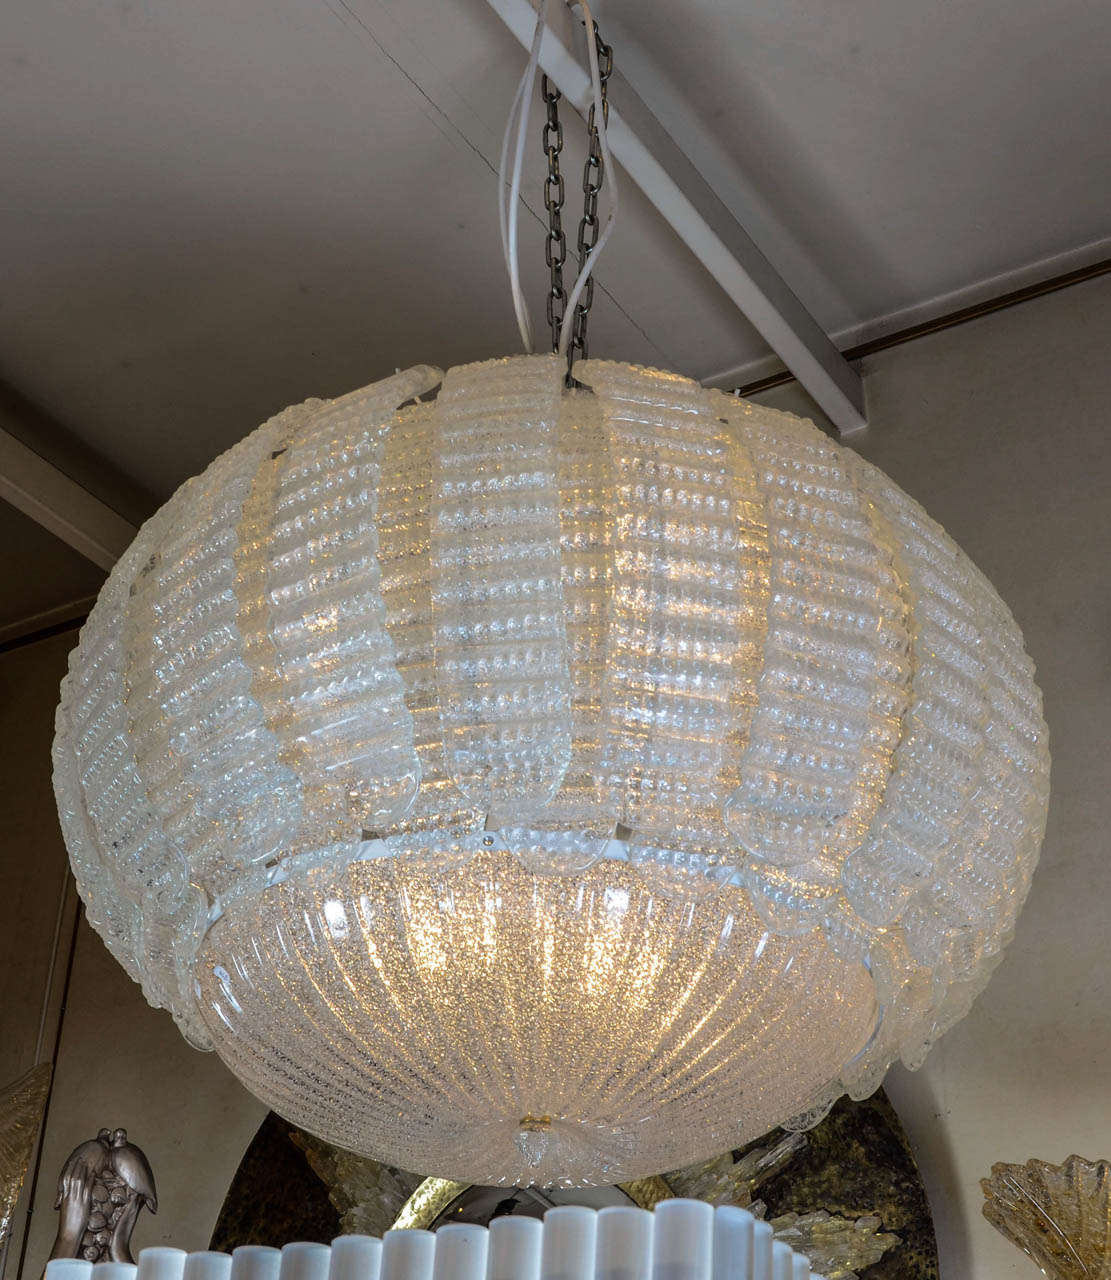 interesting chandelier in Murano glass. translucent glass with white particles.
Done in Murano by Angelo Barovier